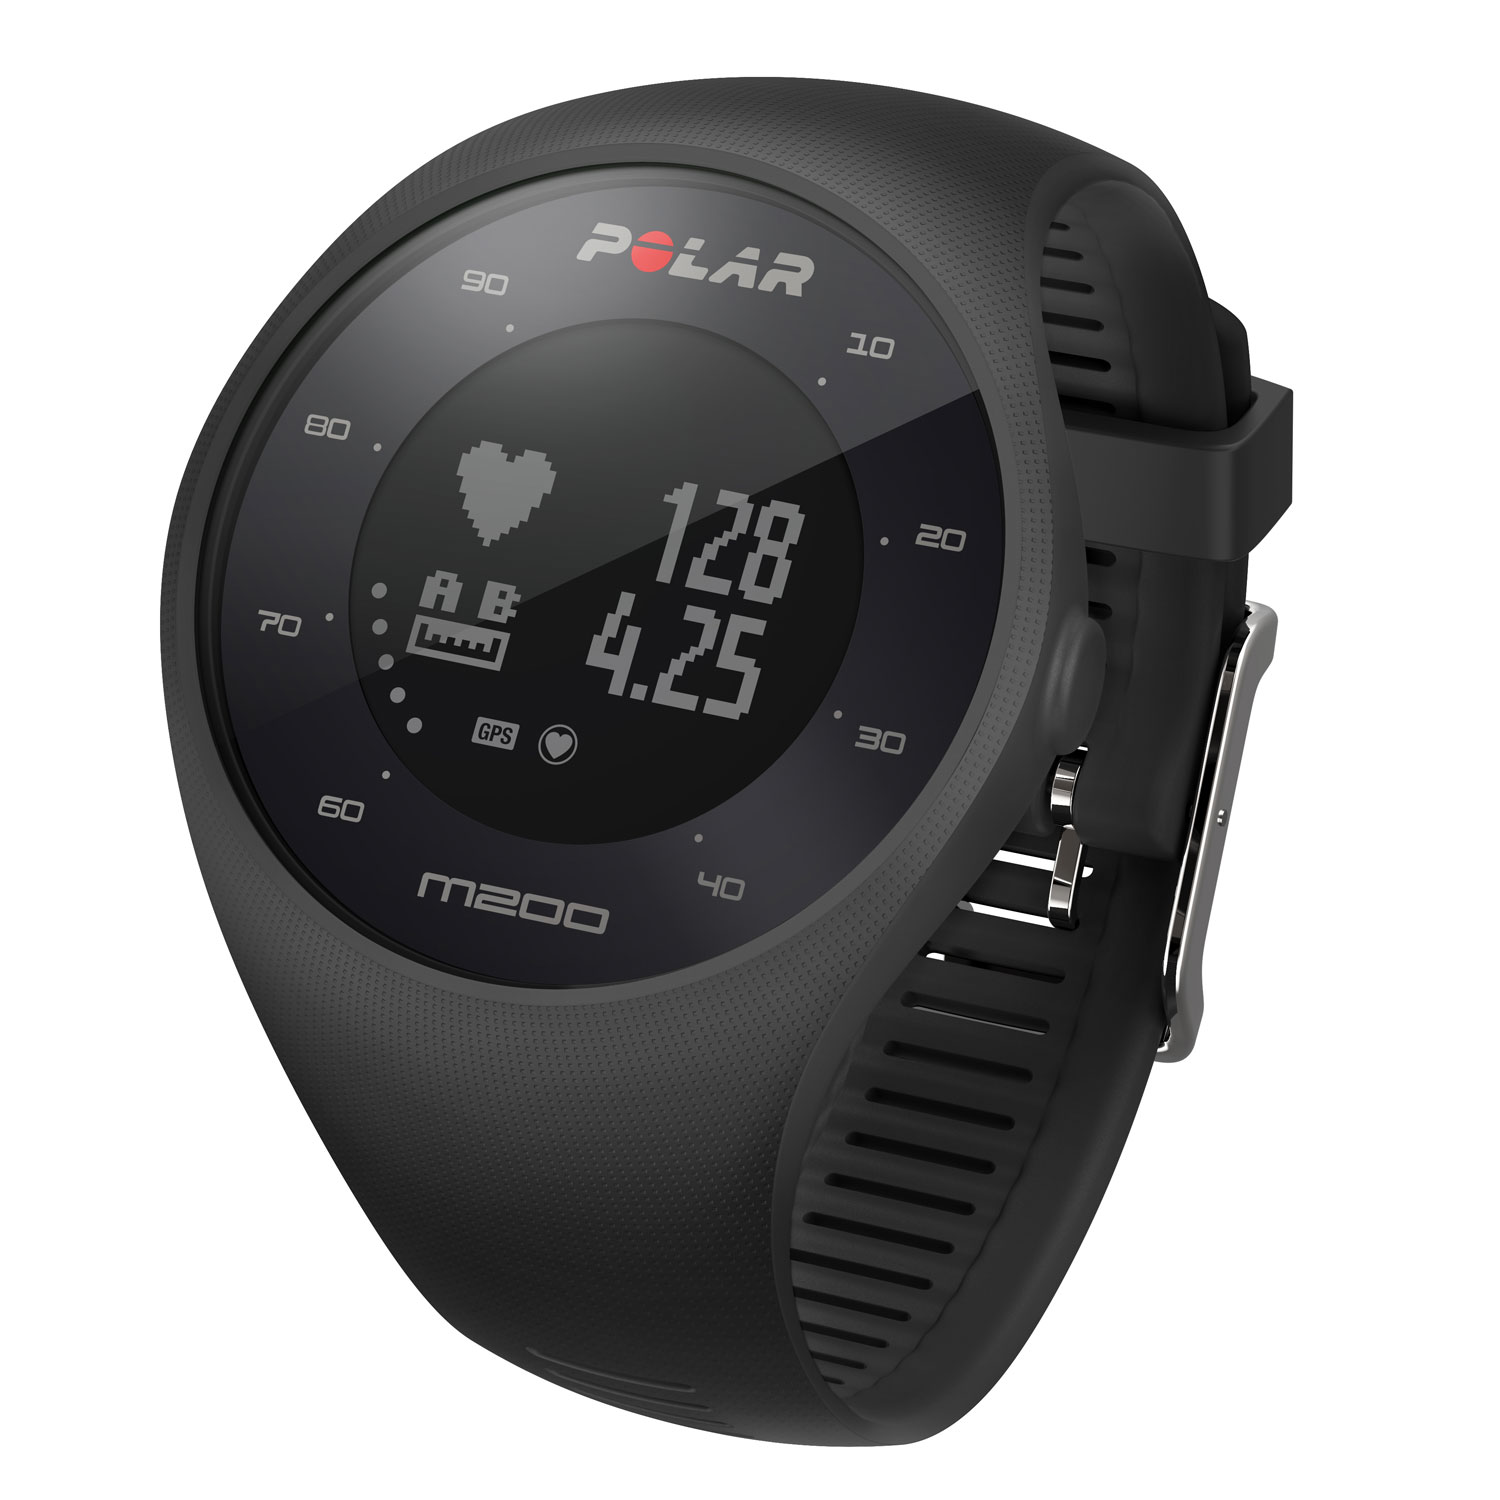 Polar M200 | Sports watch designed for 